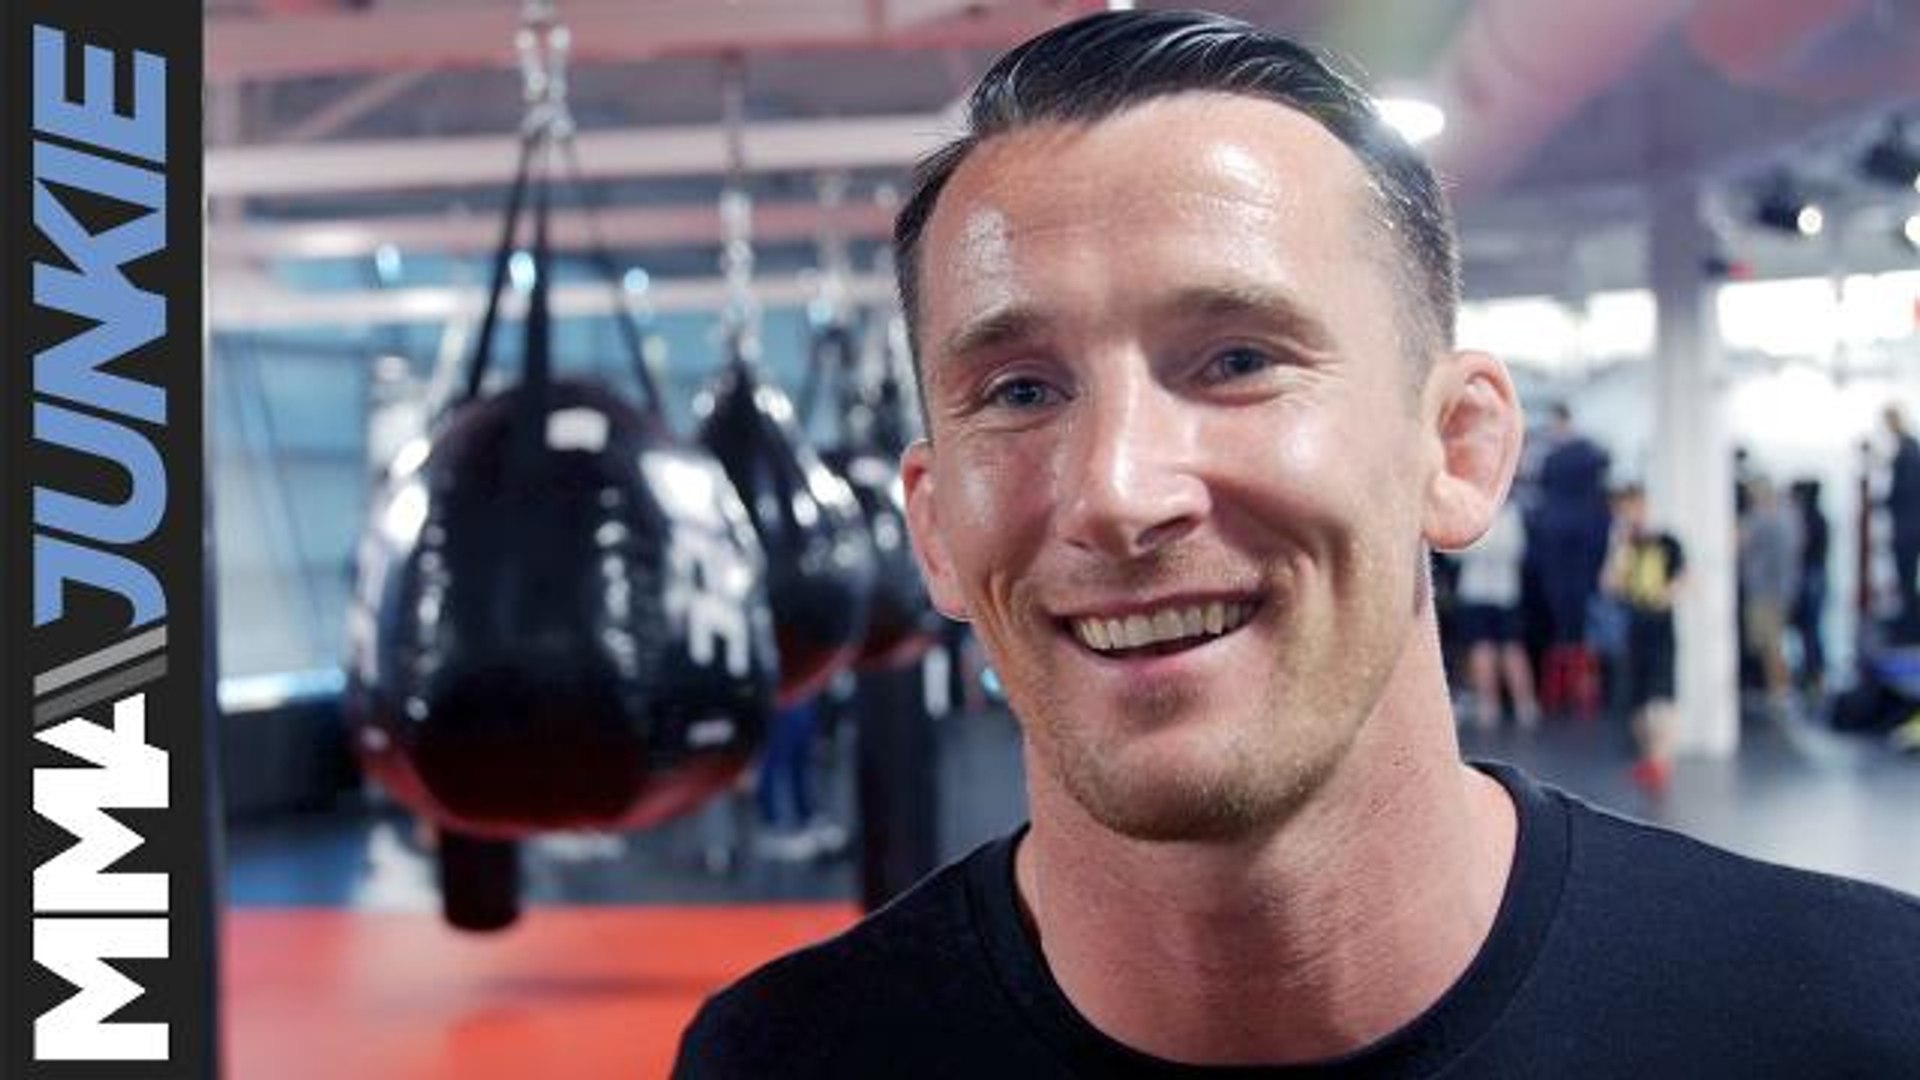 ⁣Striking coach Owen Roddy, confident McGregor has prepared all that is needed to defeat Mayweather